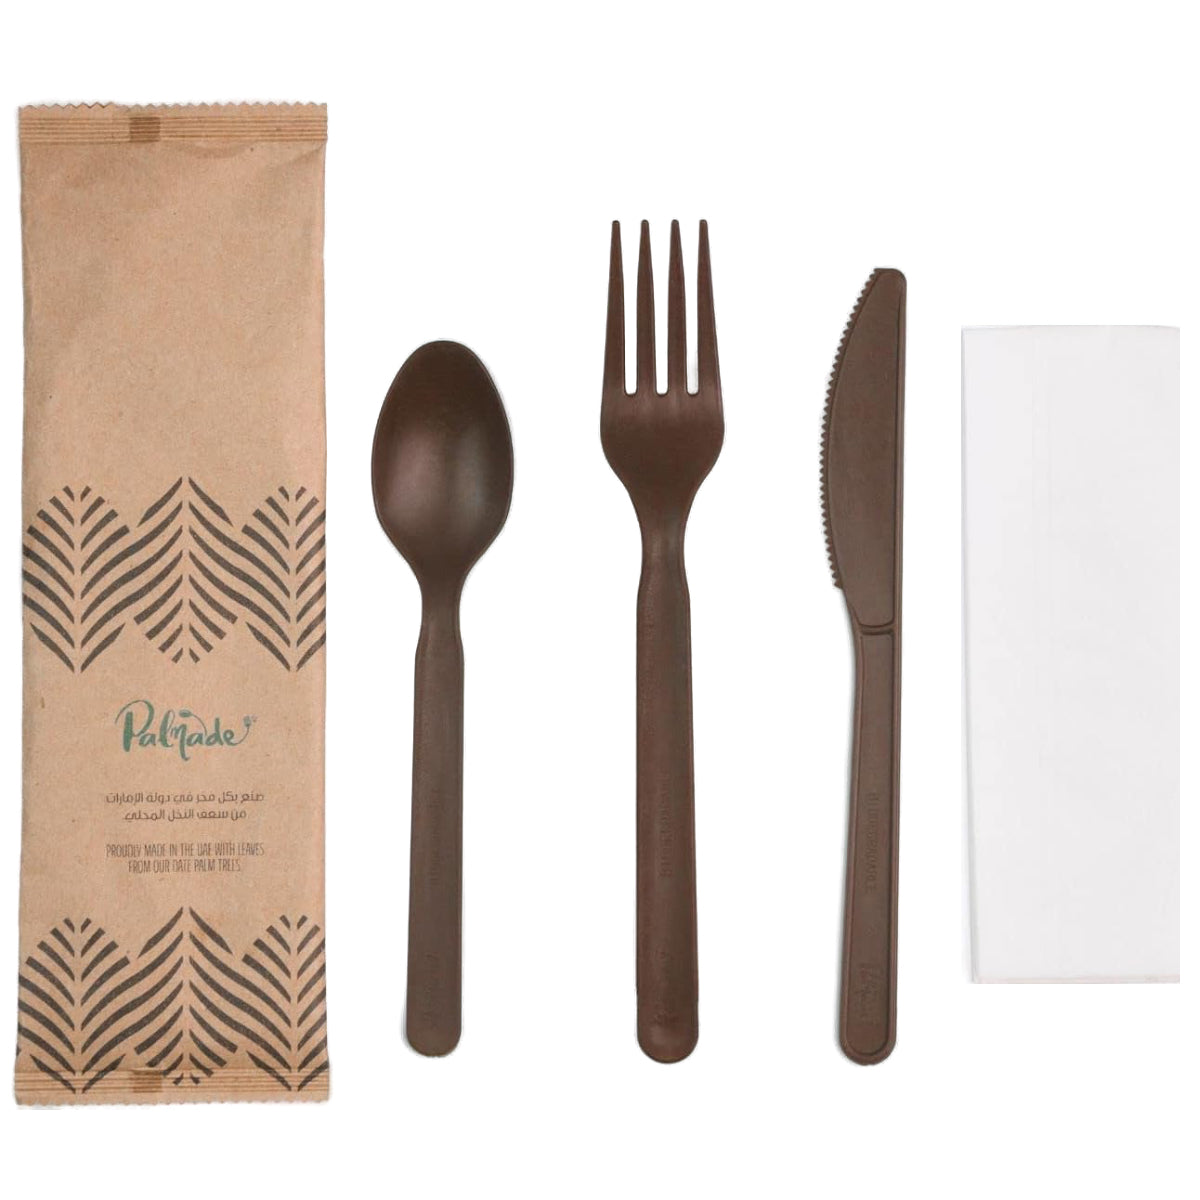 Palmade Disposable Eco Friendly, Biodegradable Cutlery Set